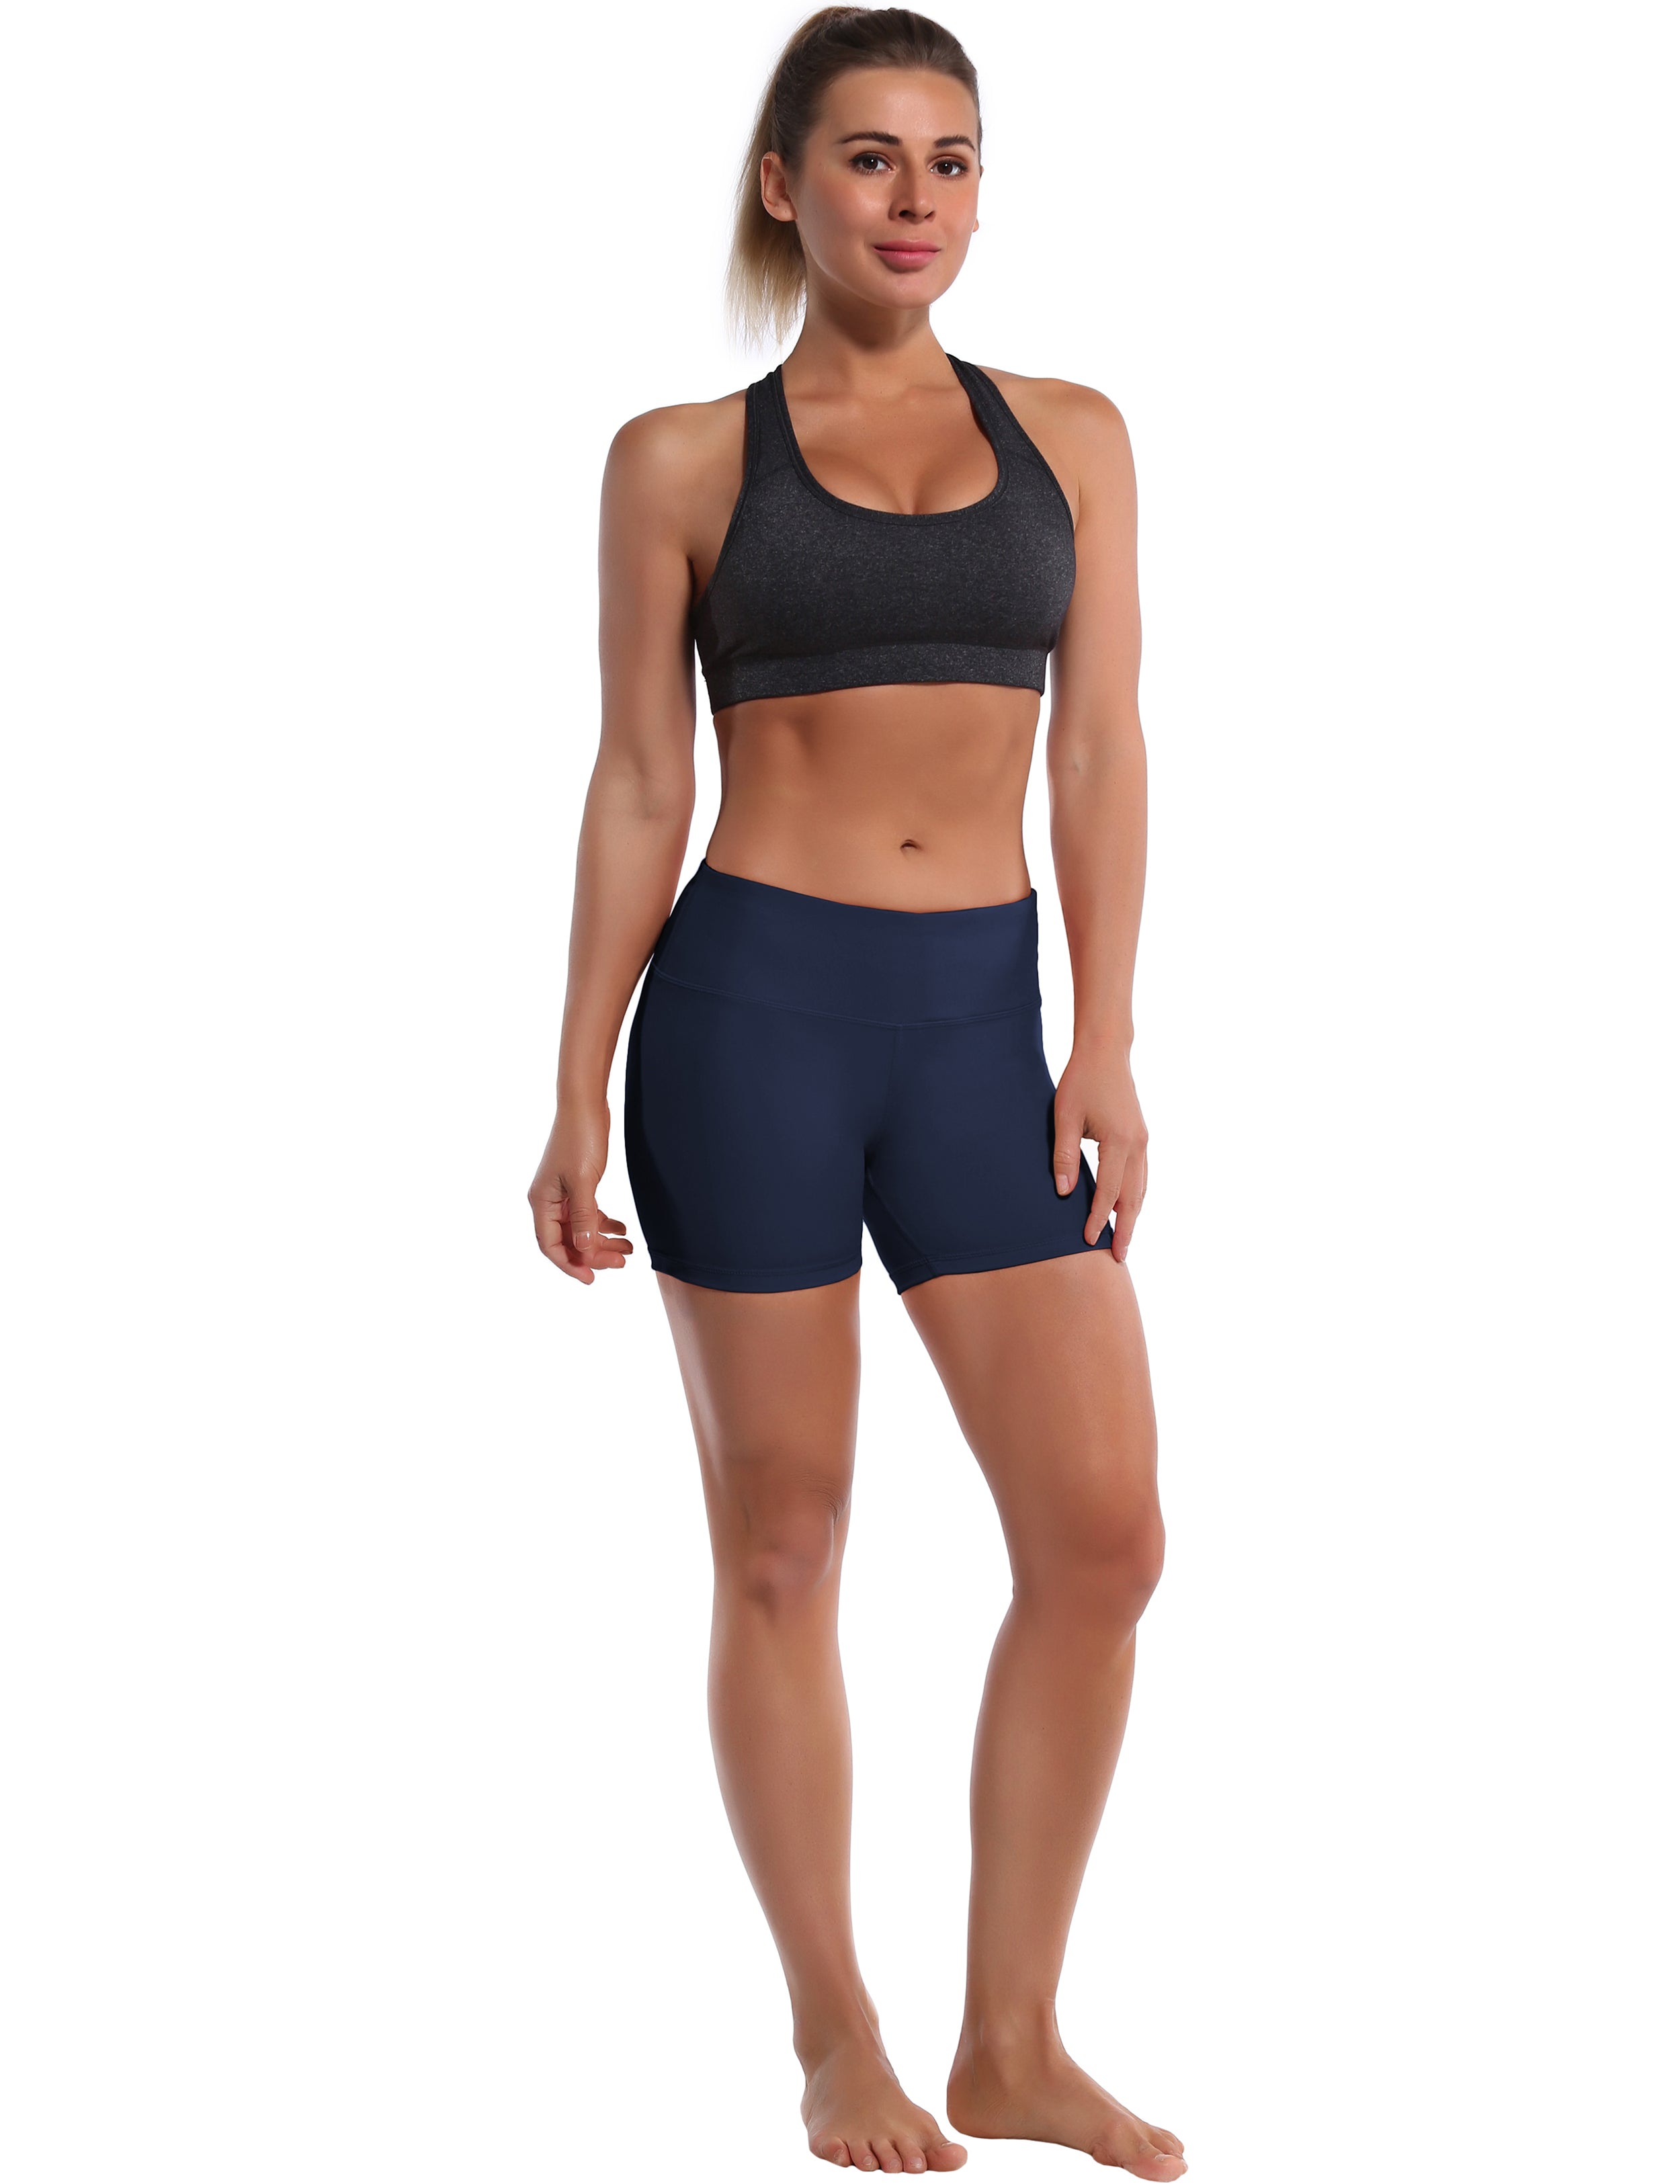 4" Pilates Shorts darknavy Sleek, soft, smooth and totally comfortable: our newest style is here. Softest-ever fabric High elasticity High density 4-way stretch Fabric doesn't attract lint easily No see-through Moisture-wicking Machine wash 75% Nylon, 25% Spandex